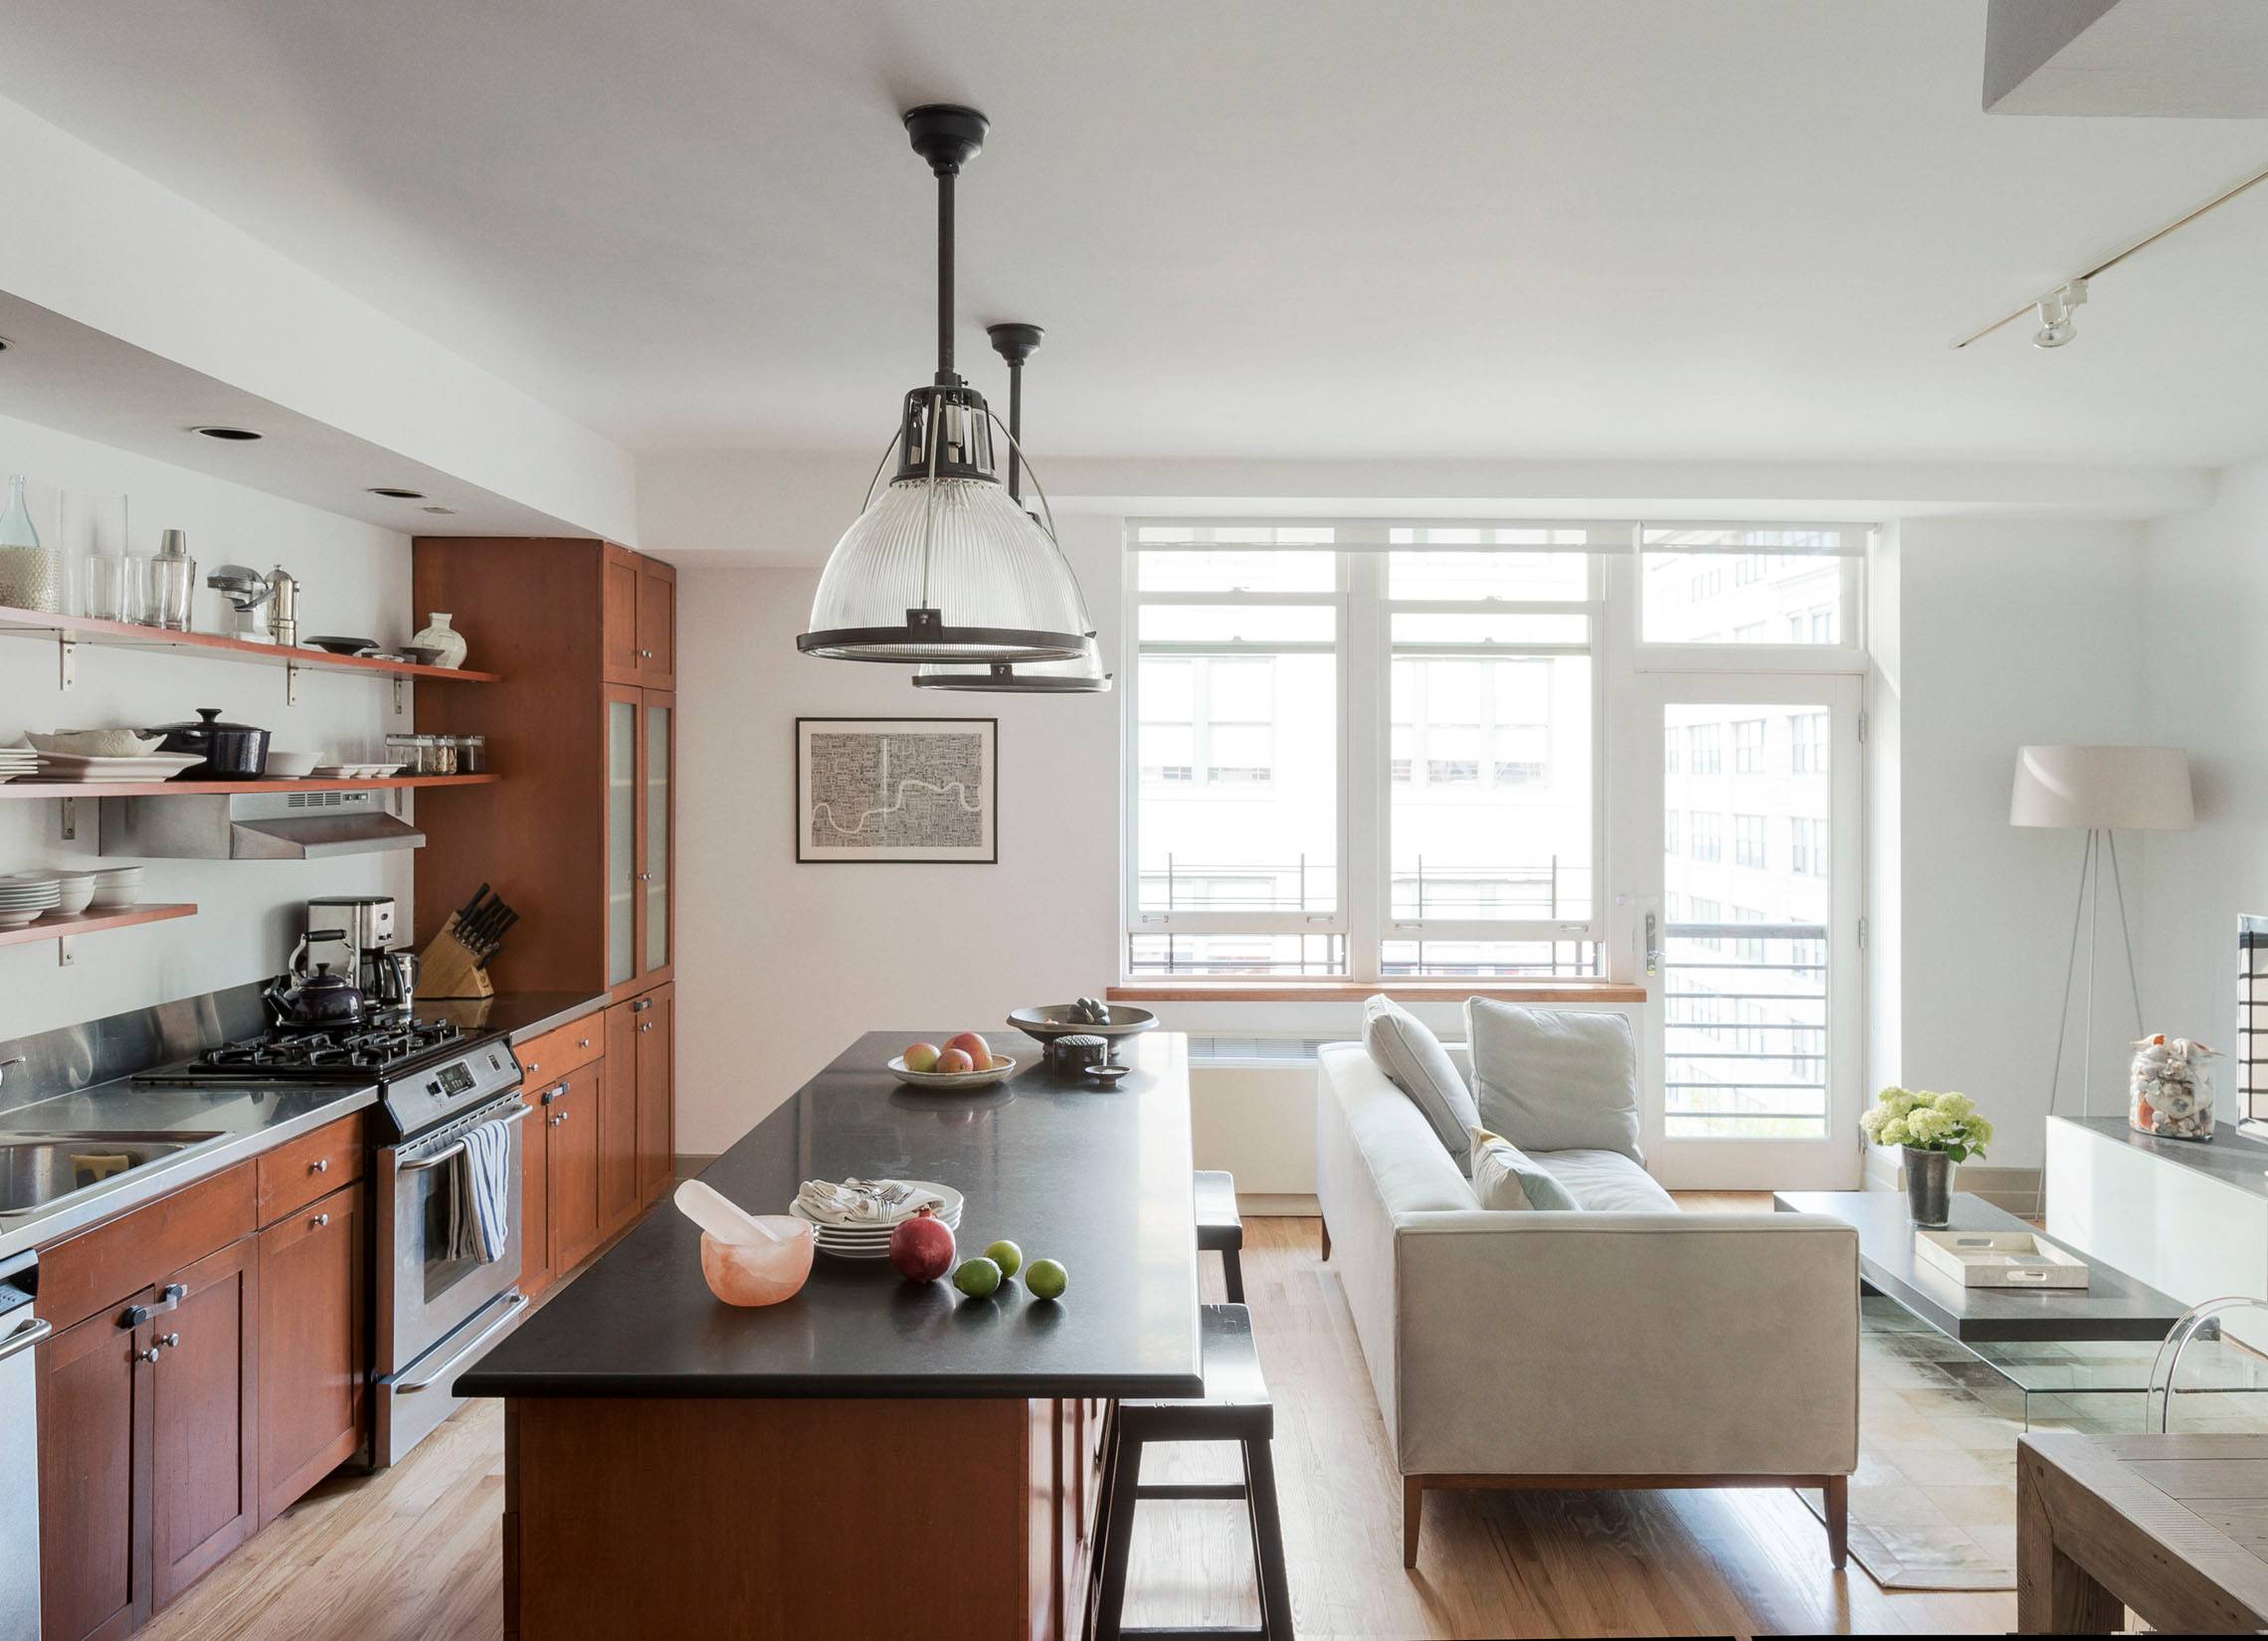 SPACIOUS 1 BEDROOM LOFT IN DUMBO WITH A GORGEOUS KITCHEN AND BALCONY